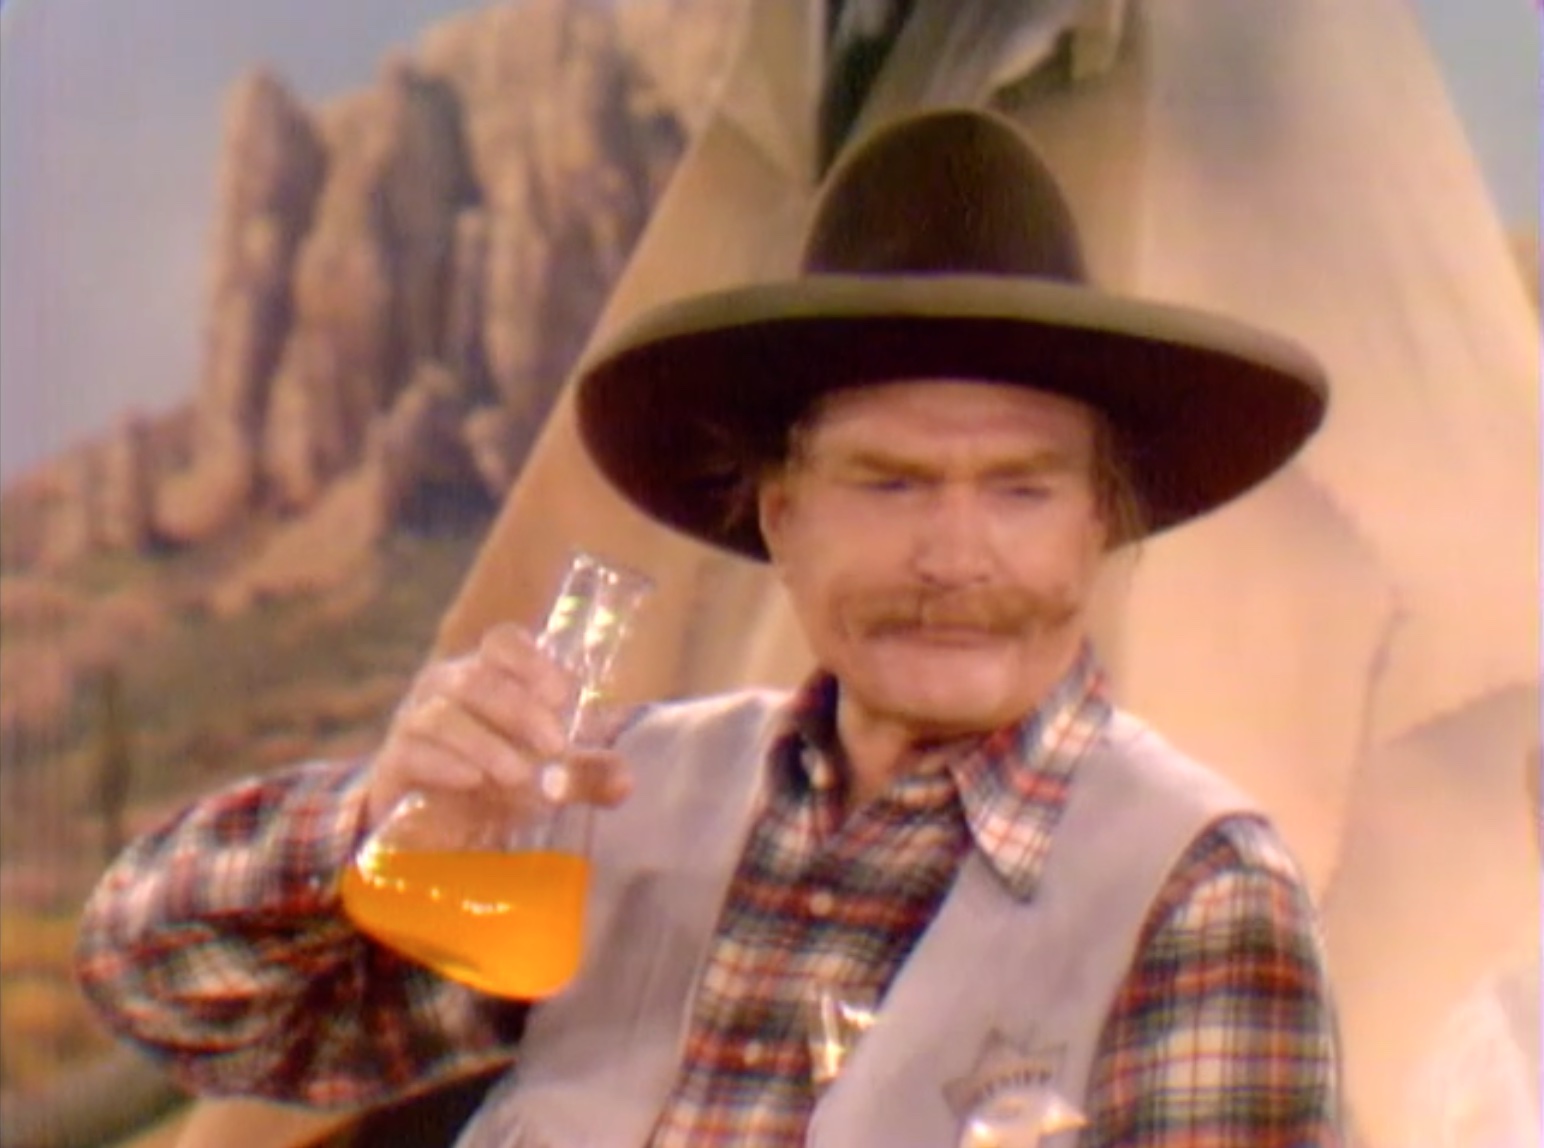 Sheriff Deadeye about to drink Running Fever's bravery potion in "The Fastest Crumb in the West"